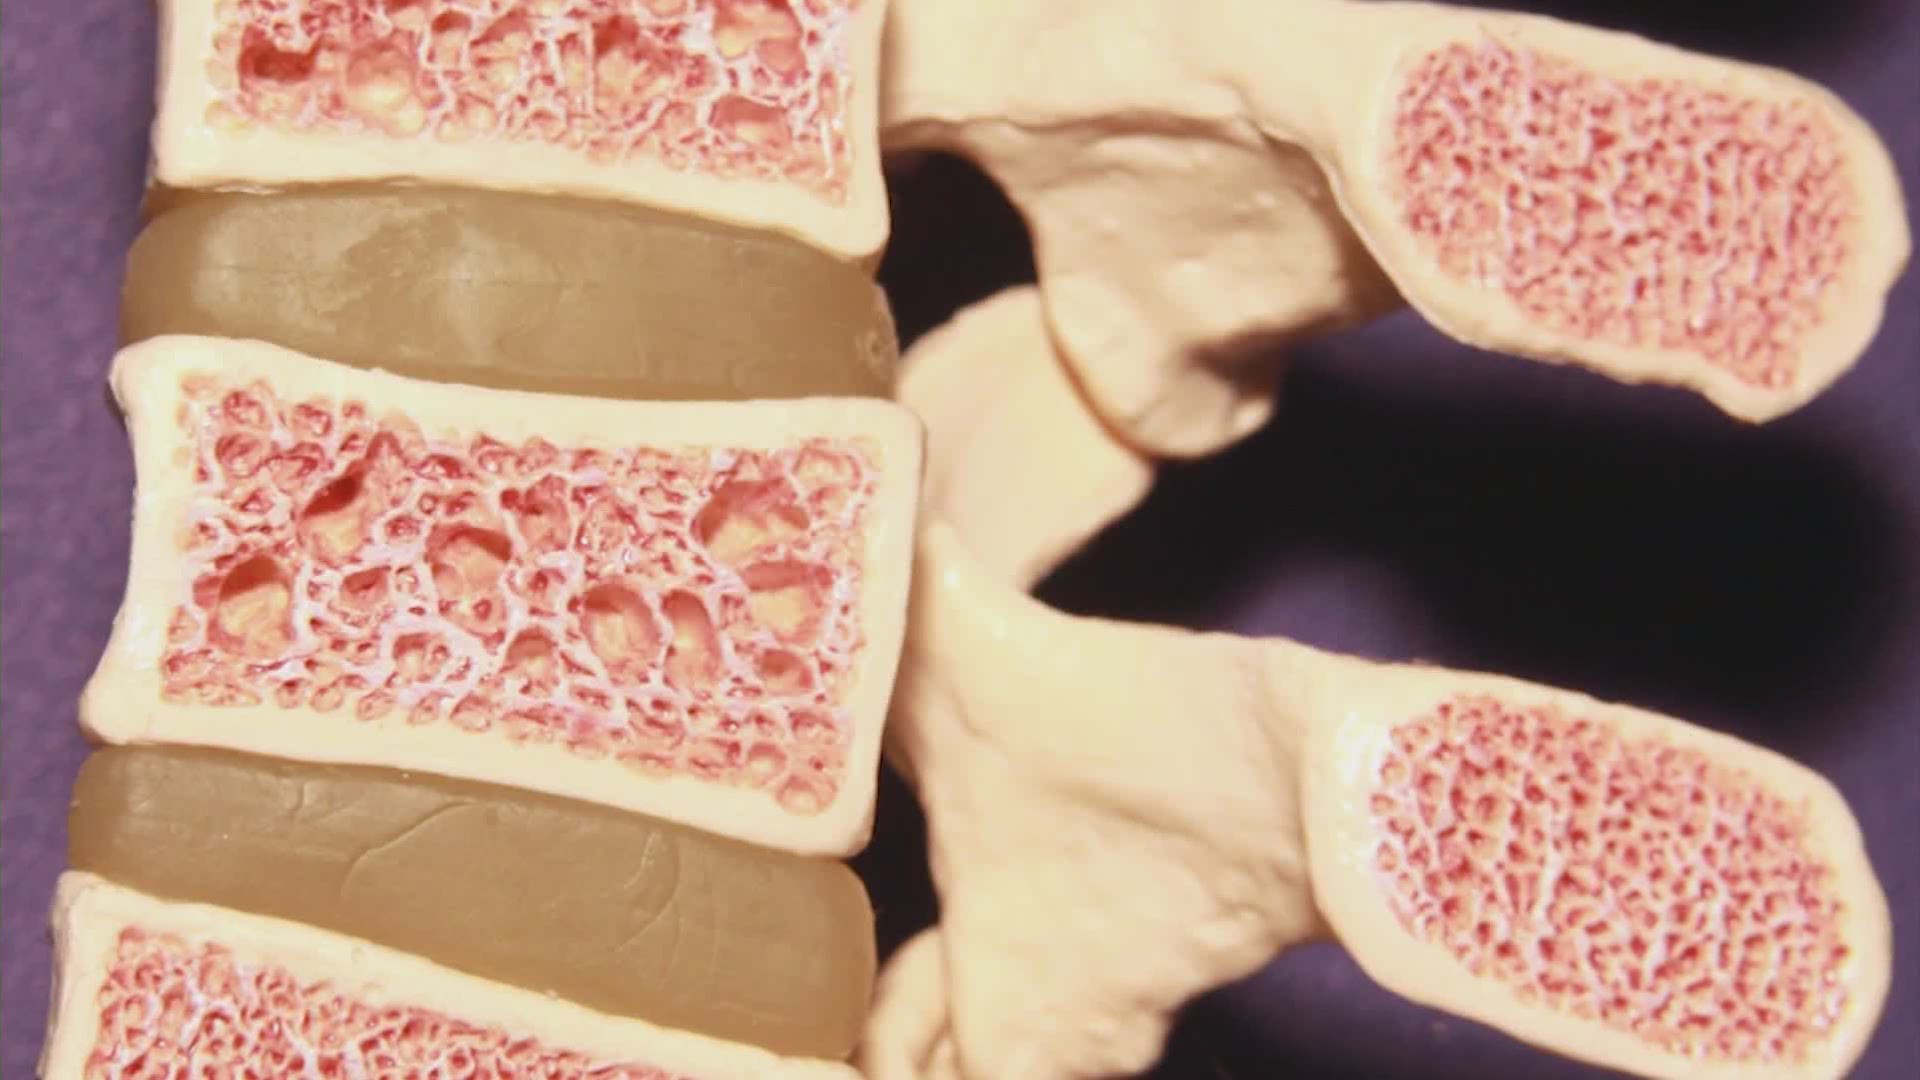 Building up your bone health now plays a key role in preventing osteoporosis later. Dr. Nahid Rianon with UT Physicians explains.